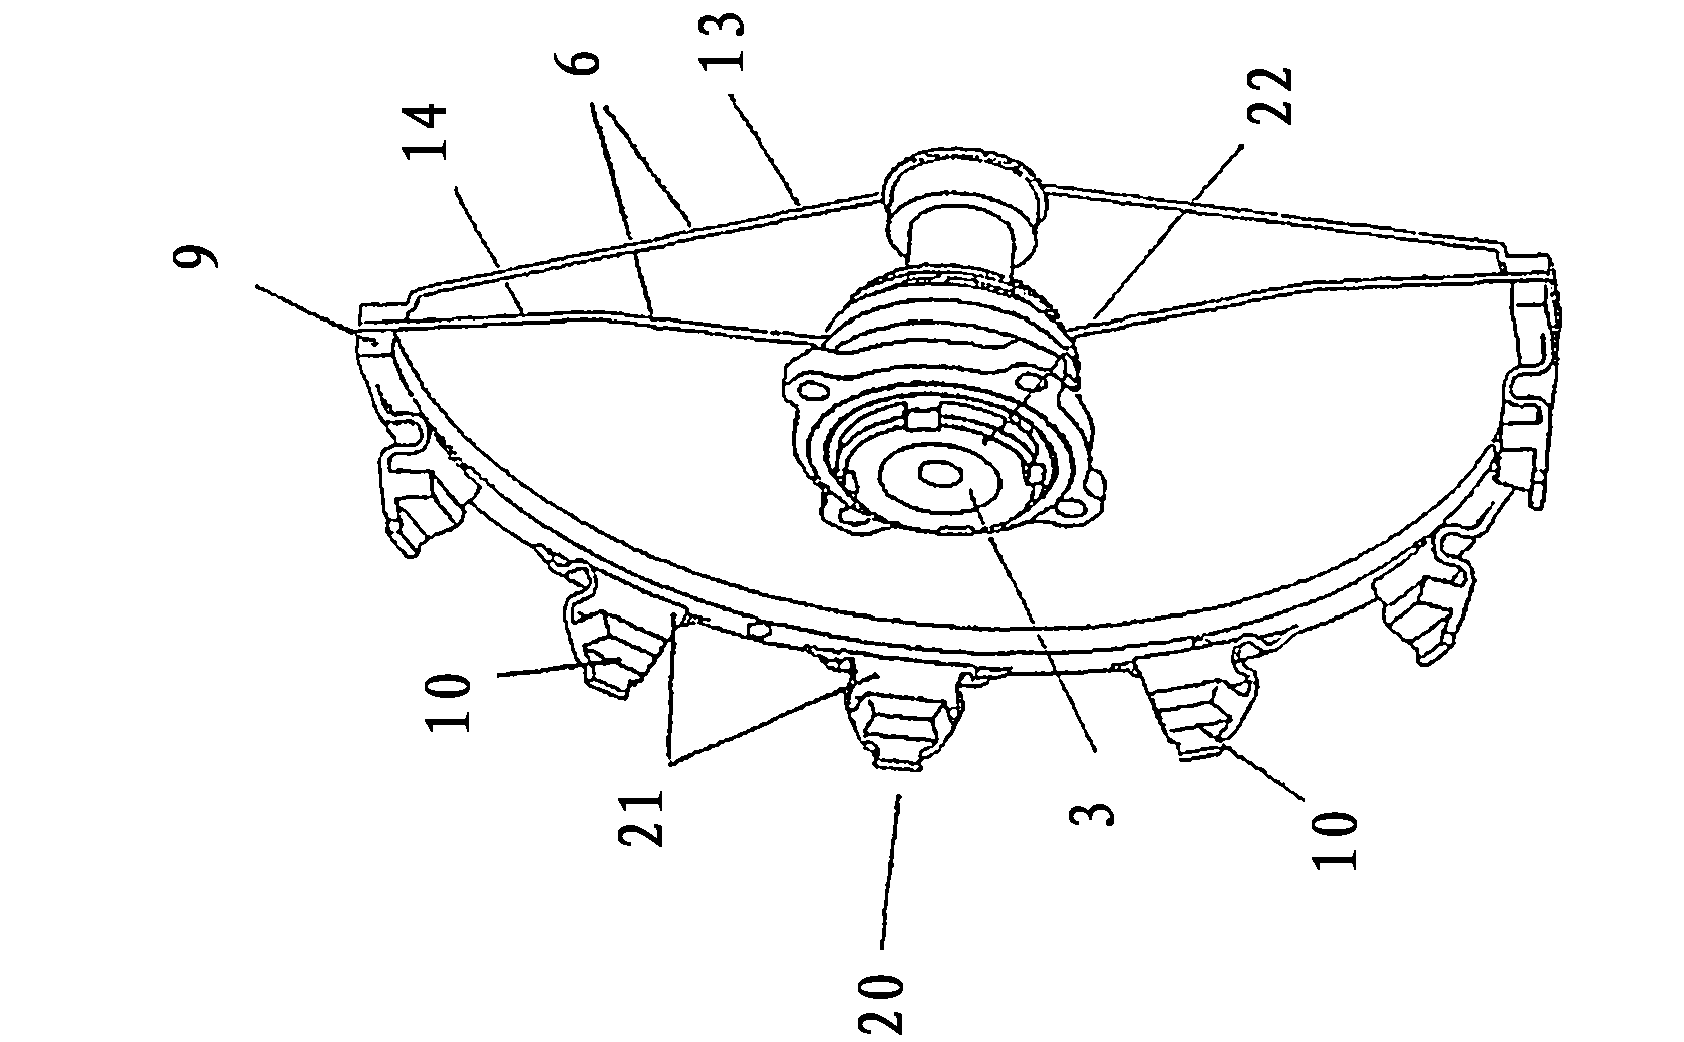 Wheel assembly for motor vehicle